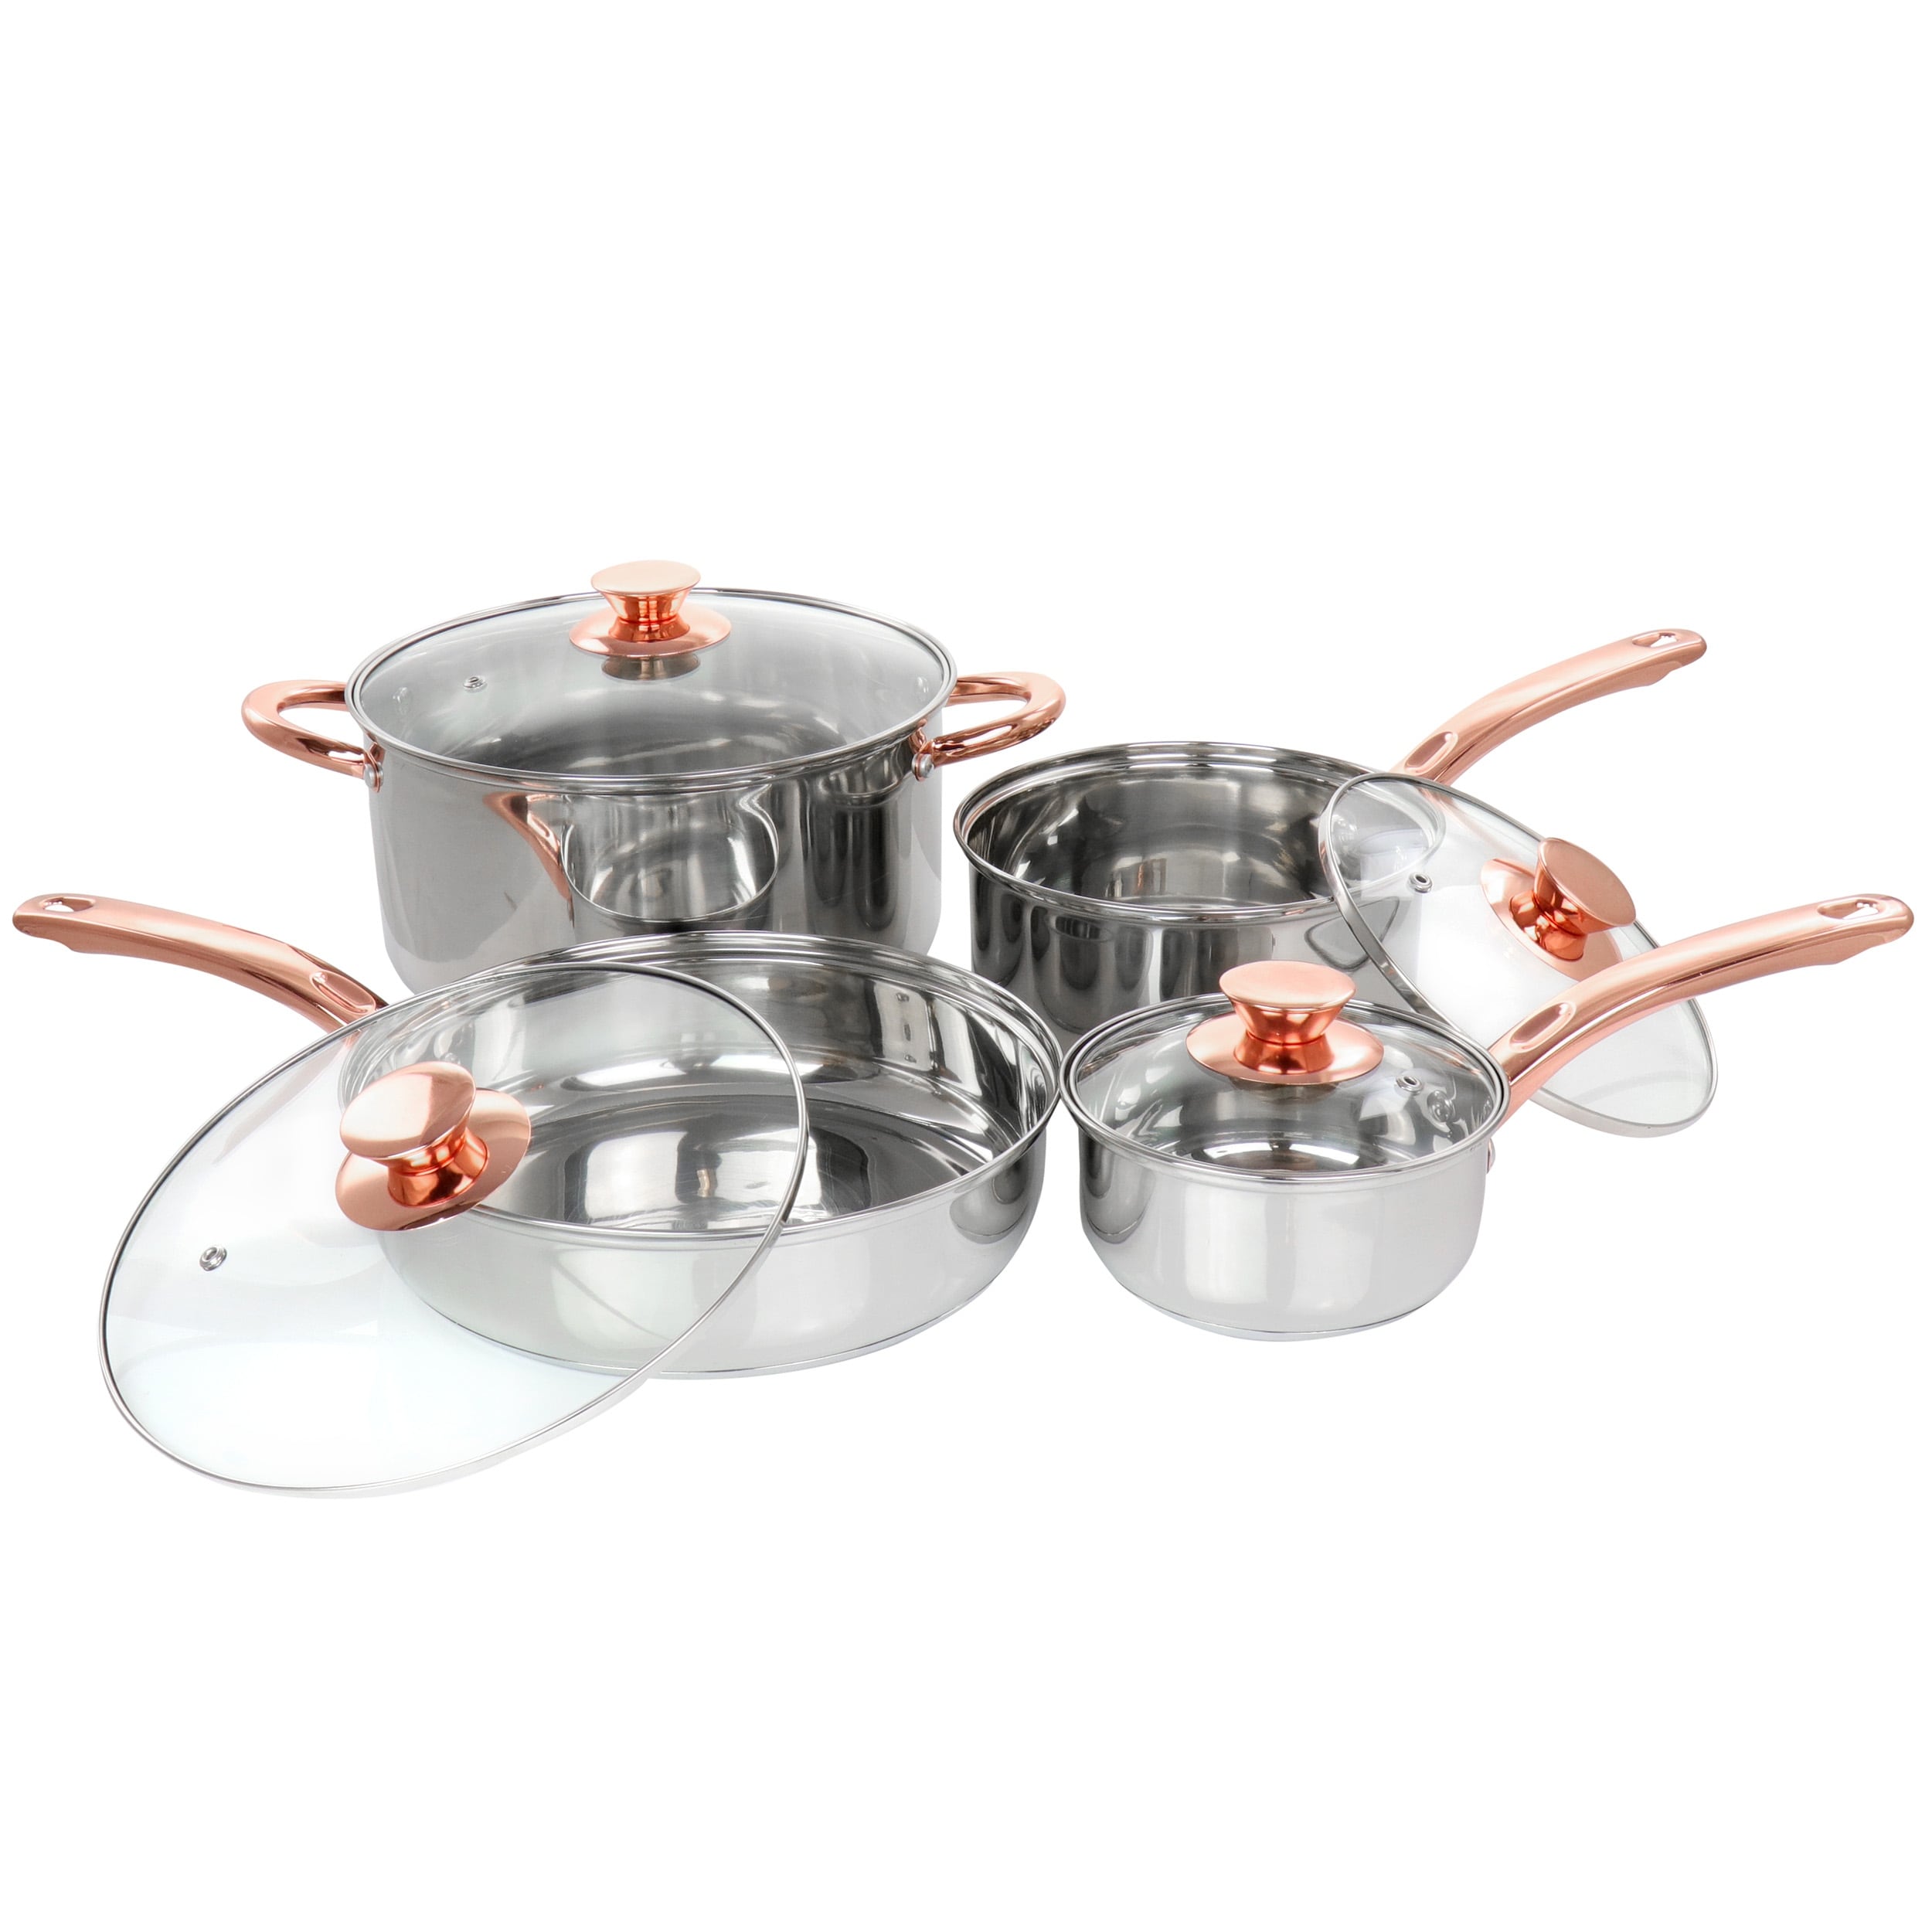 https://ak1.ostkcdn.com/images/products/is/images/direct/3c081da6677f18c72995665ada441e4a3be2d3fa/Gibson-Home-Ansonville-8-Piece-Stainless-Steel-Cookware-Set-with-Rose-Gold-Handles.jpg